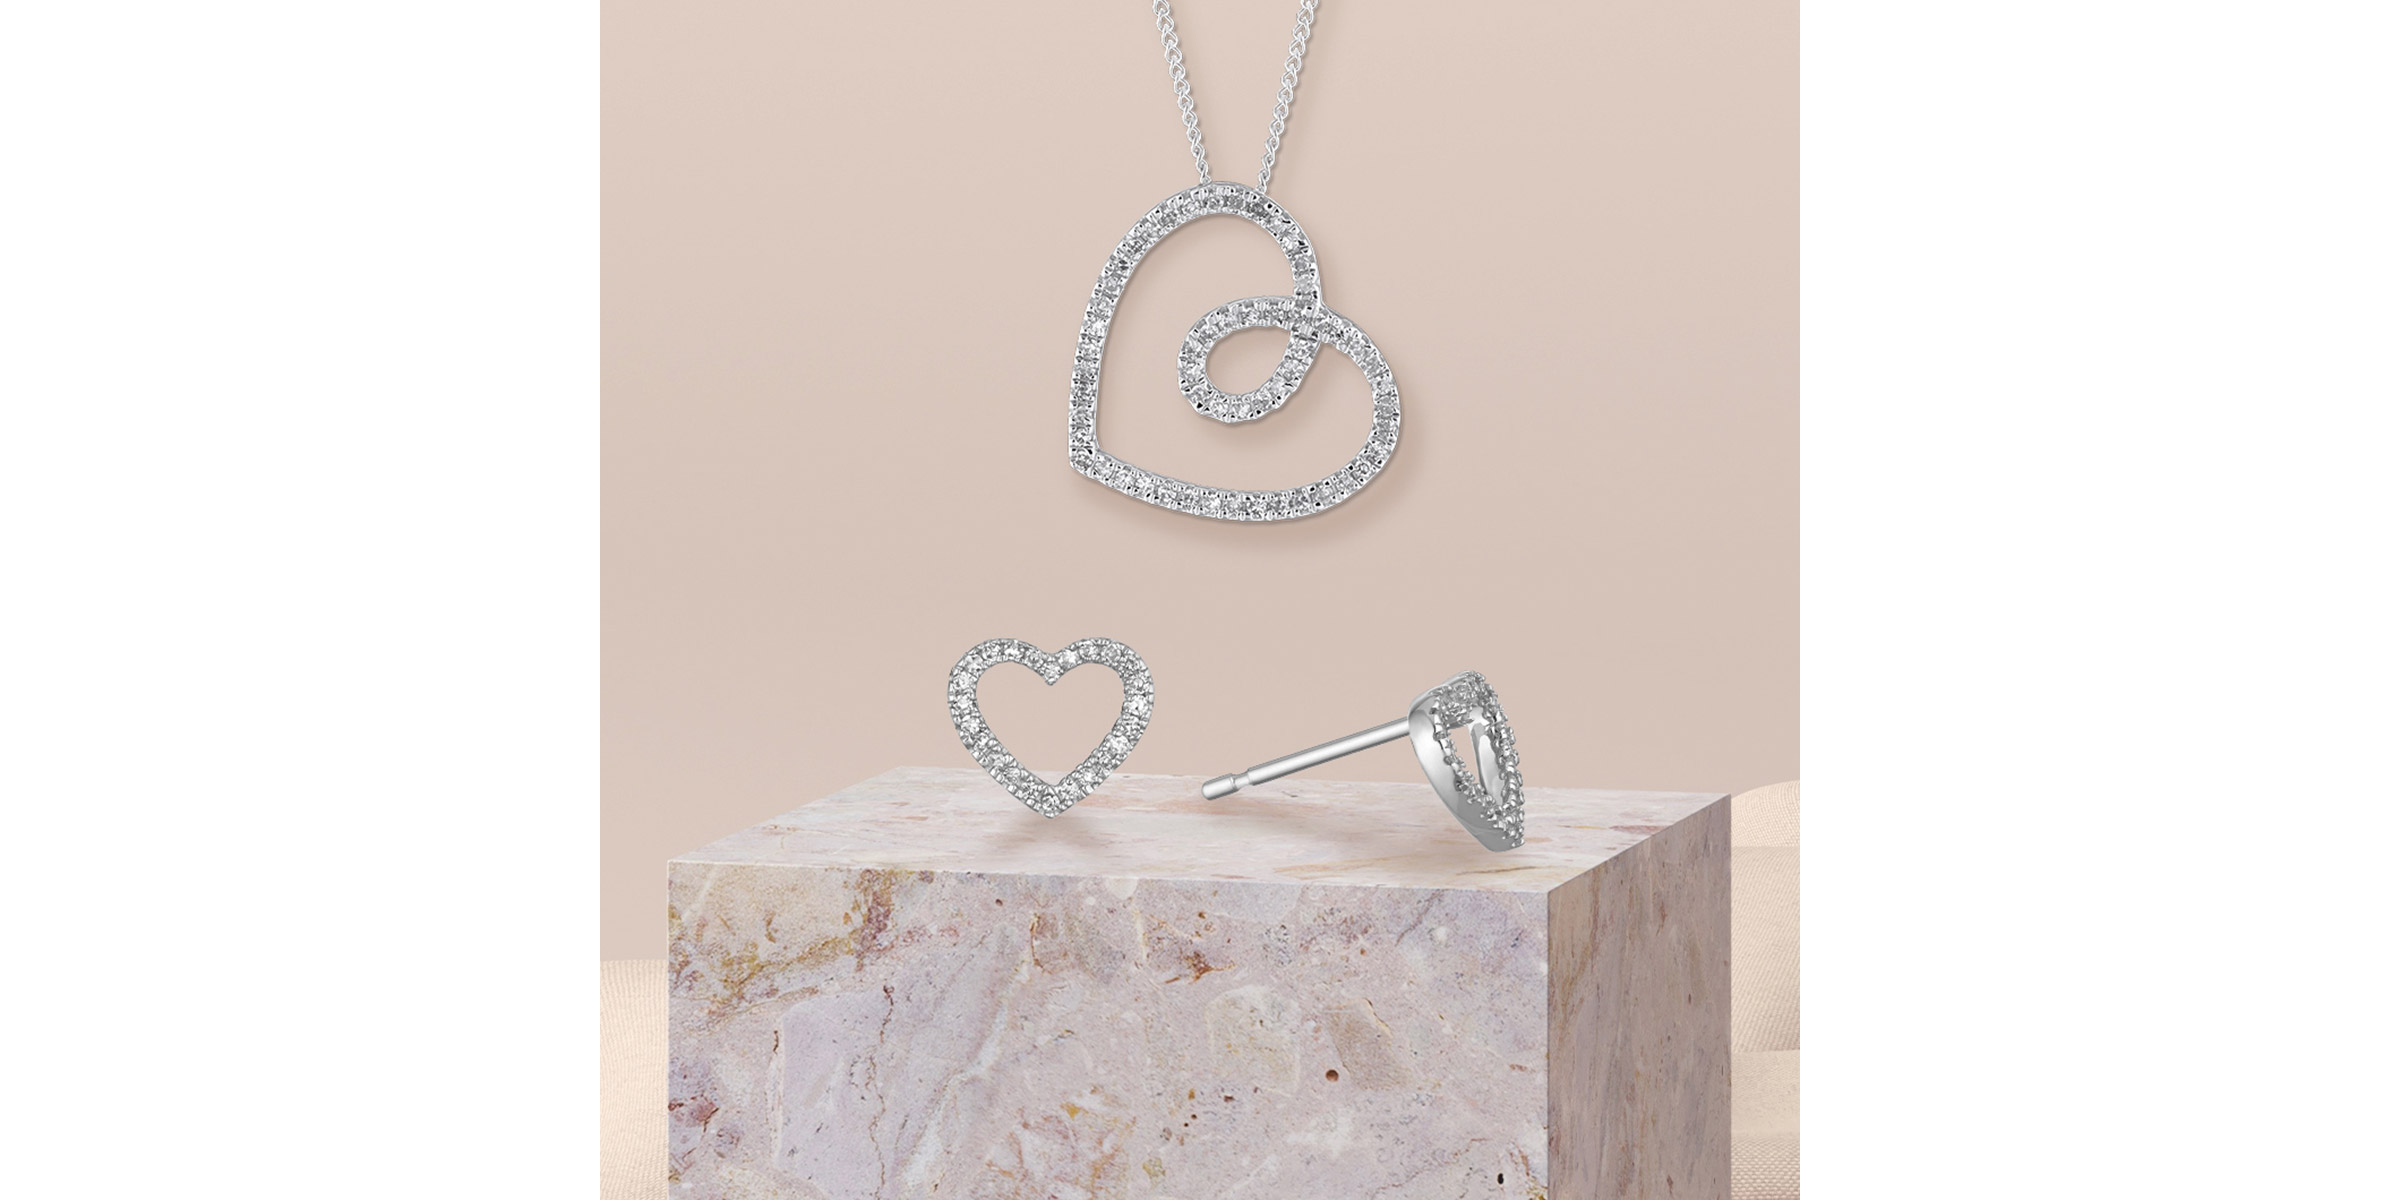 Silver heart shaped necklace and earrings